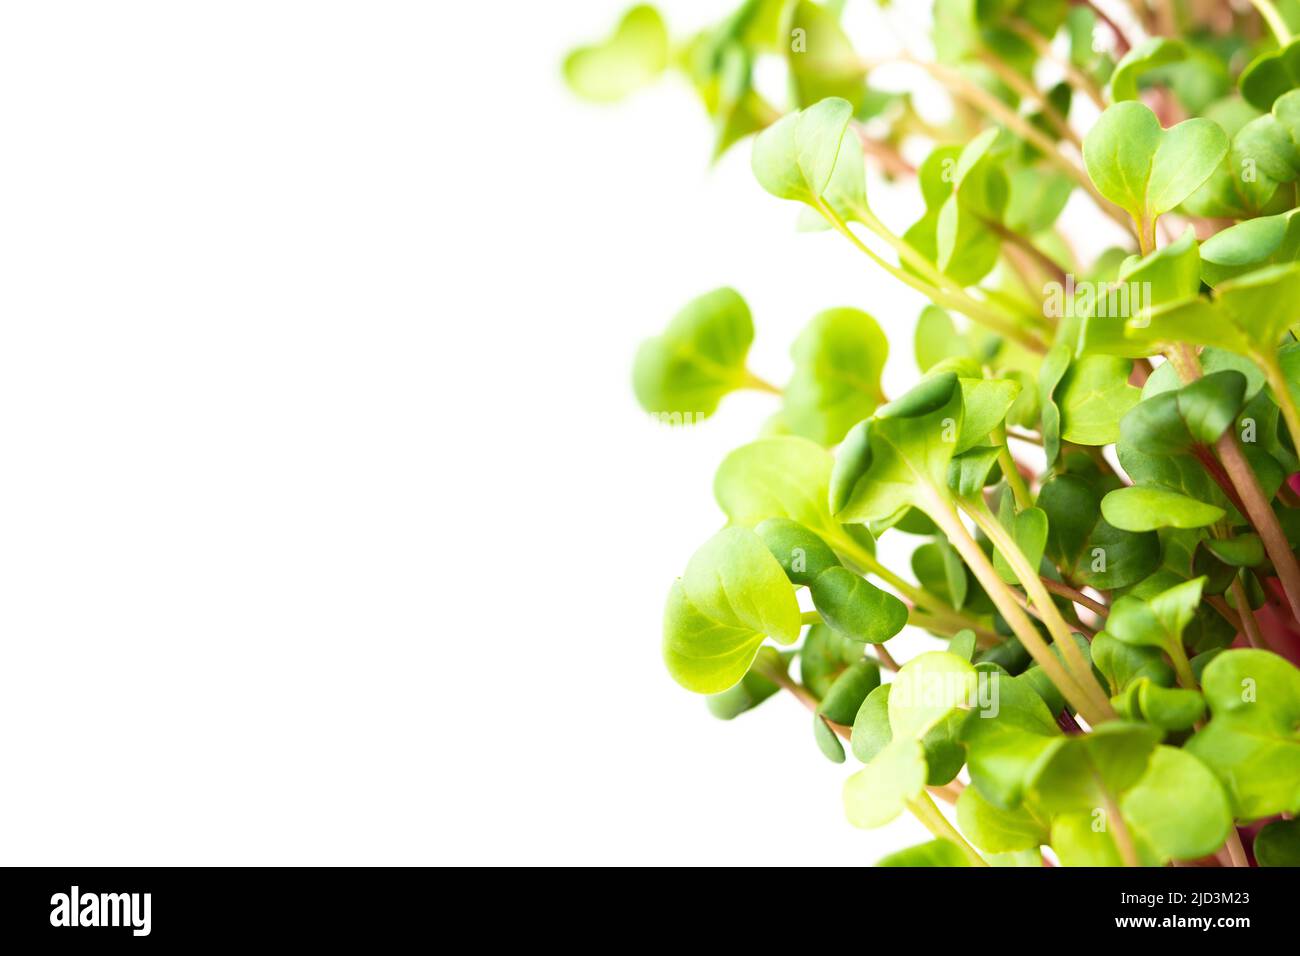 Vegetable greens of pink radish, useful microgreen close-up on a white background, organic food Stock Photo